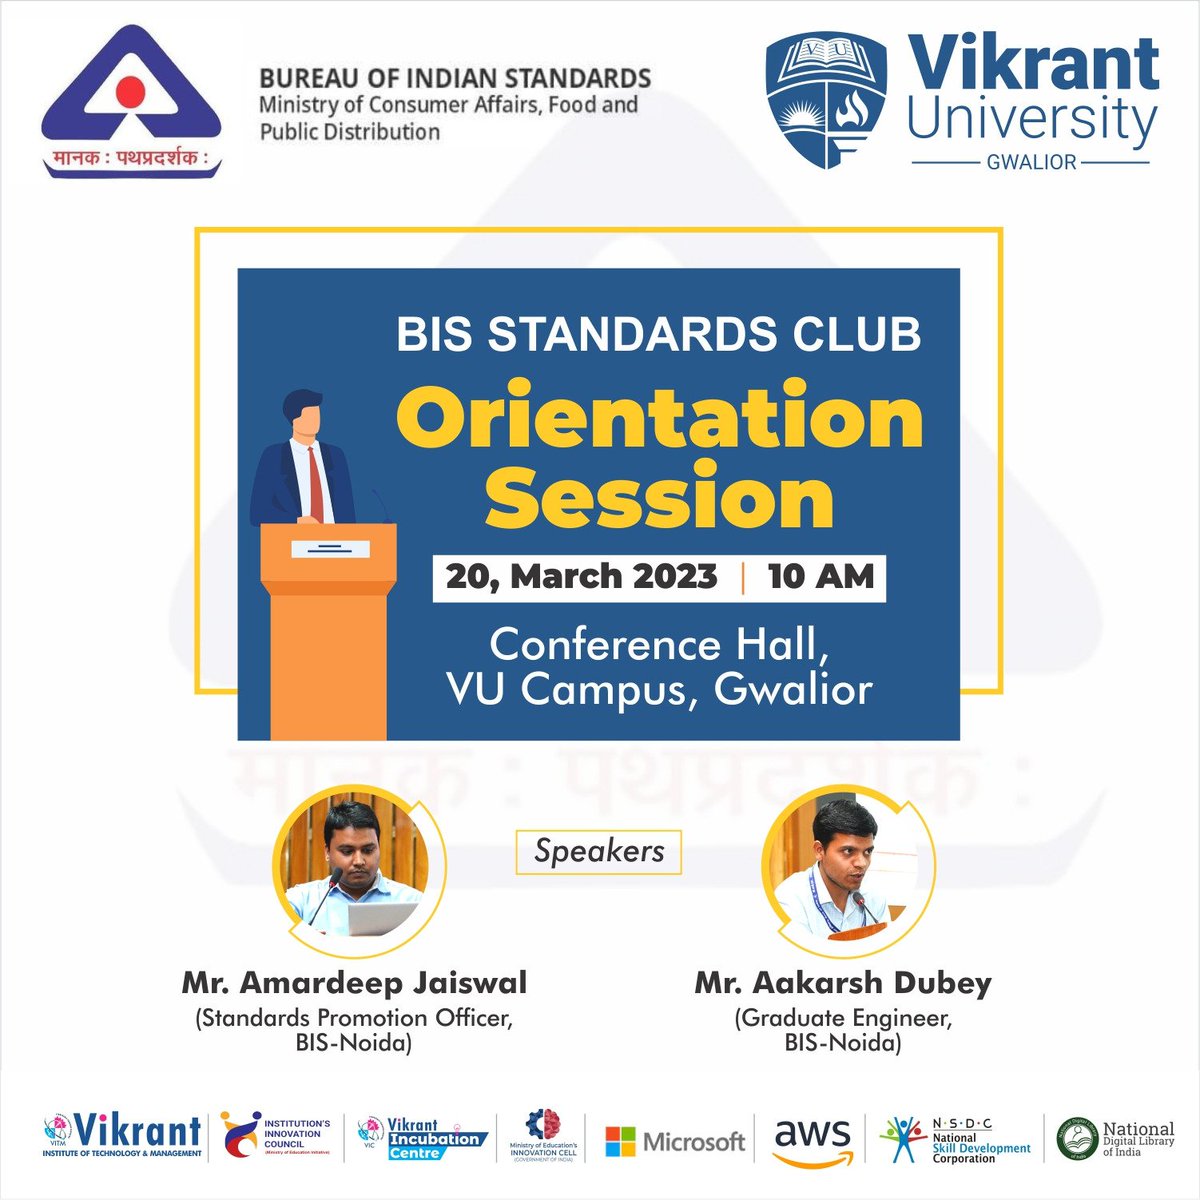 As VITM is now associated with #BIS as standard's club. BIS, New delhi is organizing an orientation session, which will be focused on the formation of standard club and activities to be conducted under it.

#VikrantUniversity #StandardsClub #ISI #BureauOfIndianStandards #Gwalior